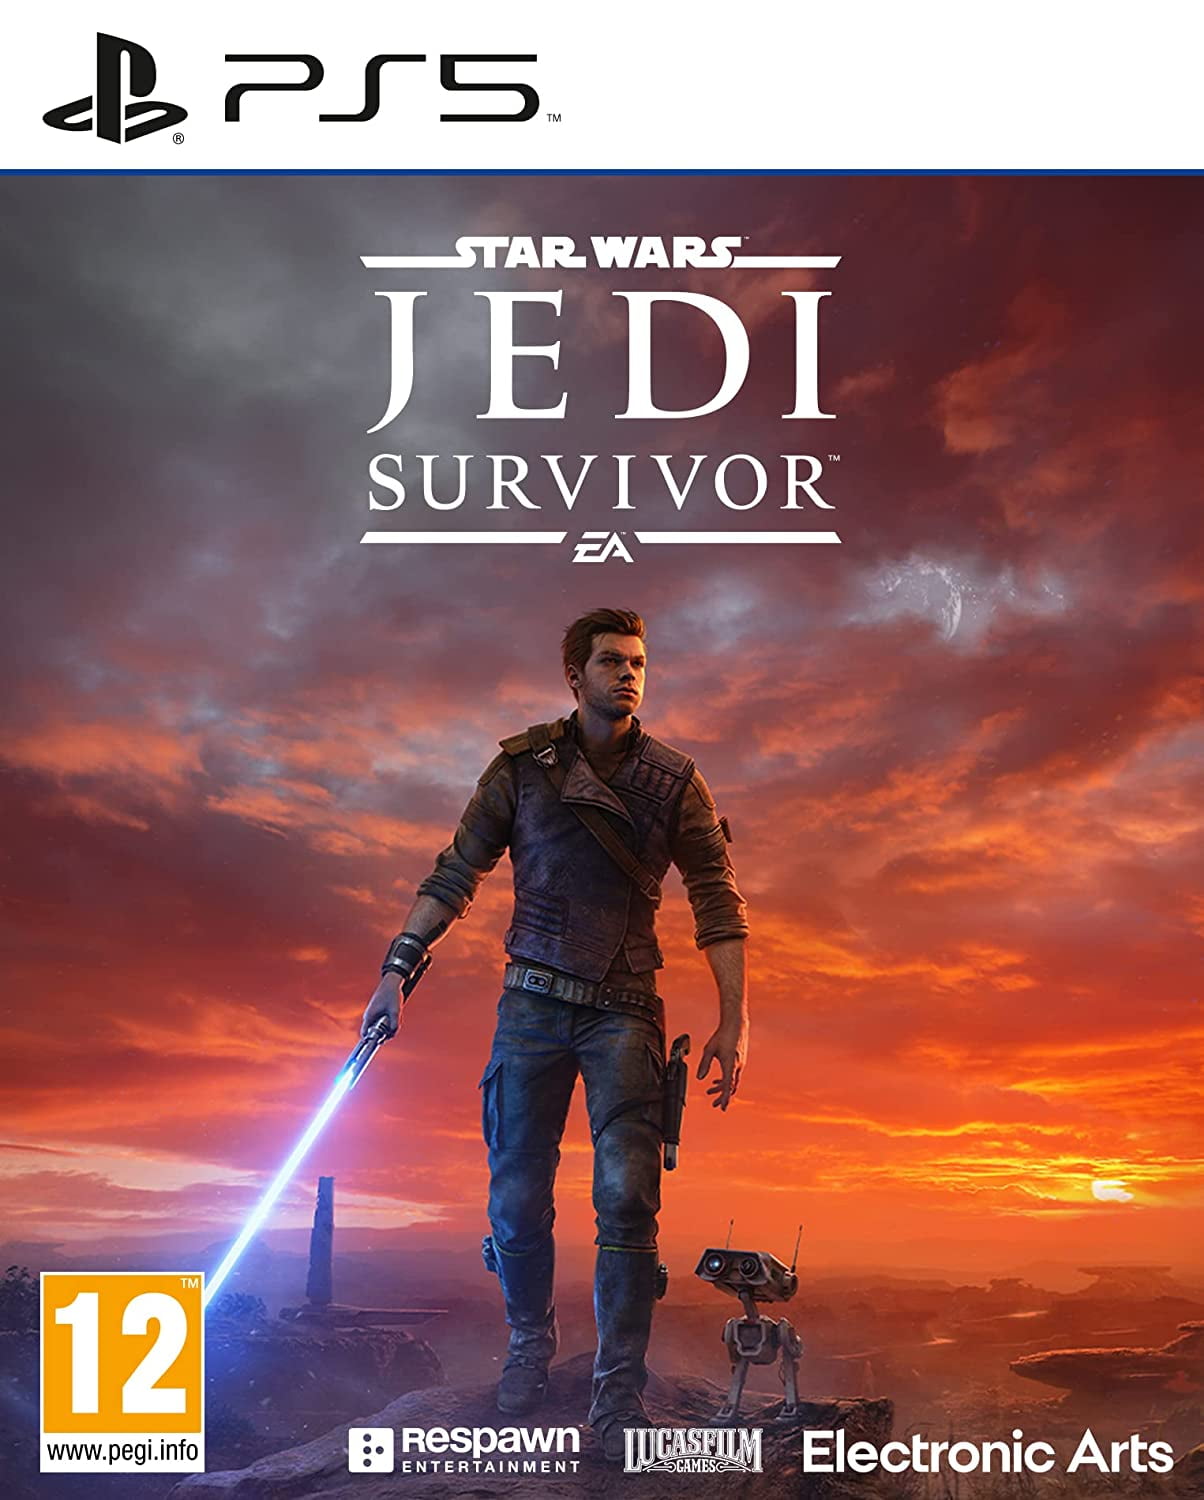 Star Wars Jedi: Survivor PS5 Ad Crops Out Third-Party Controller